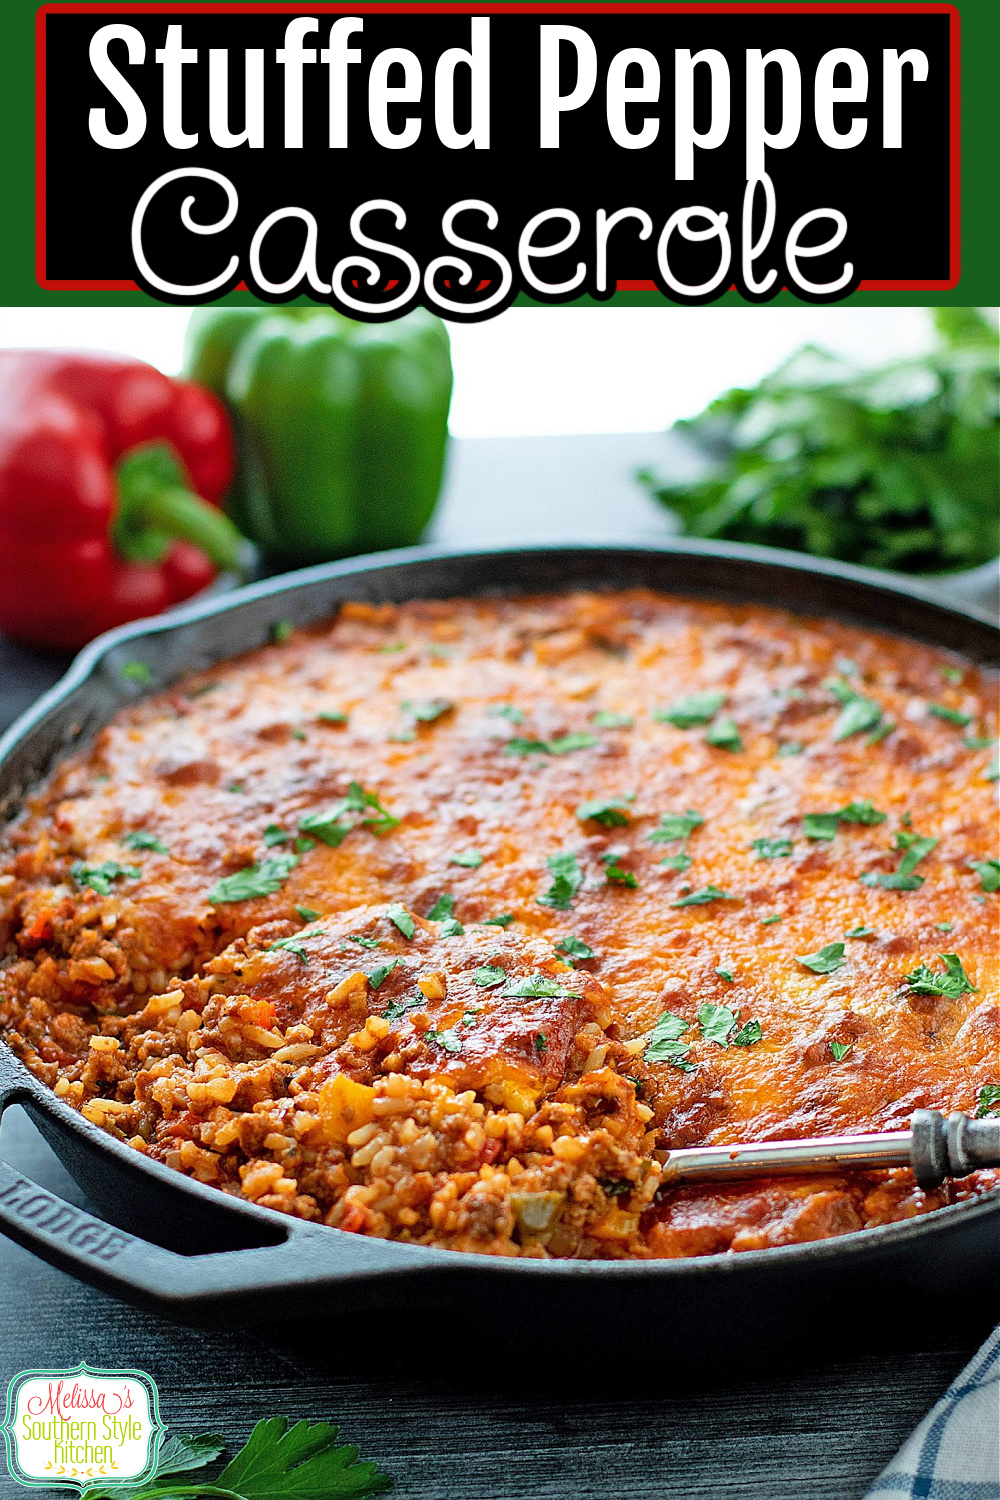 This Stuffed Pepper Casserole features a deconstructed mixture of stuffed pepper deliciousness #stuffedpeppers #stuffedpeppercasserole #casseroles #casserolerecipes #easygroundbeefrecipes via @melissasssk